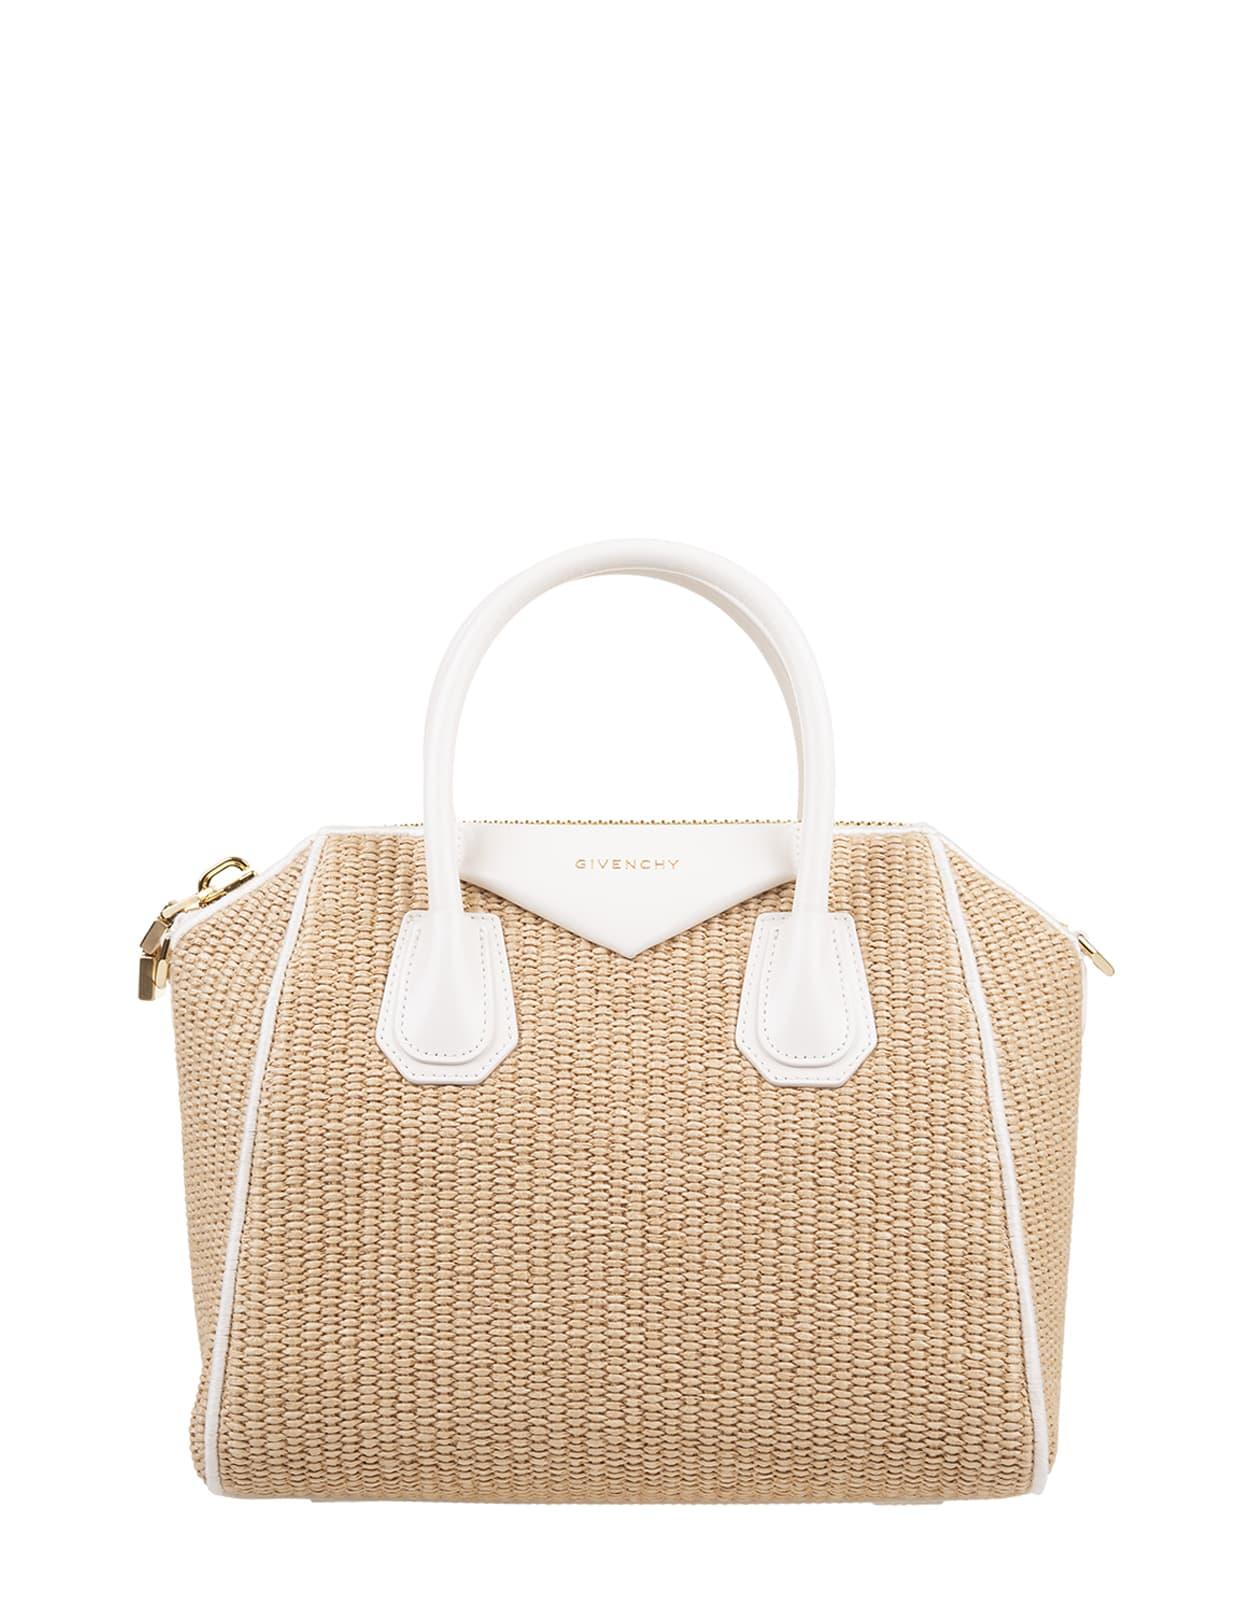 Givenchy Small Antigona Bag In Natural Raffia And White Leather | Lyst